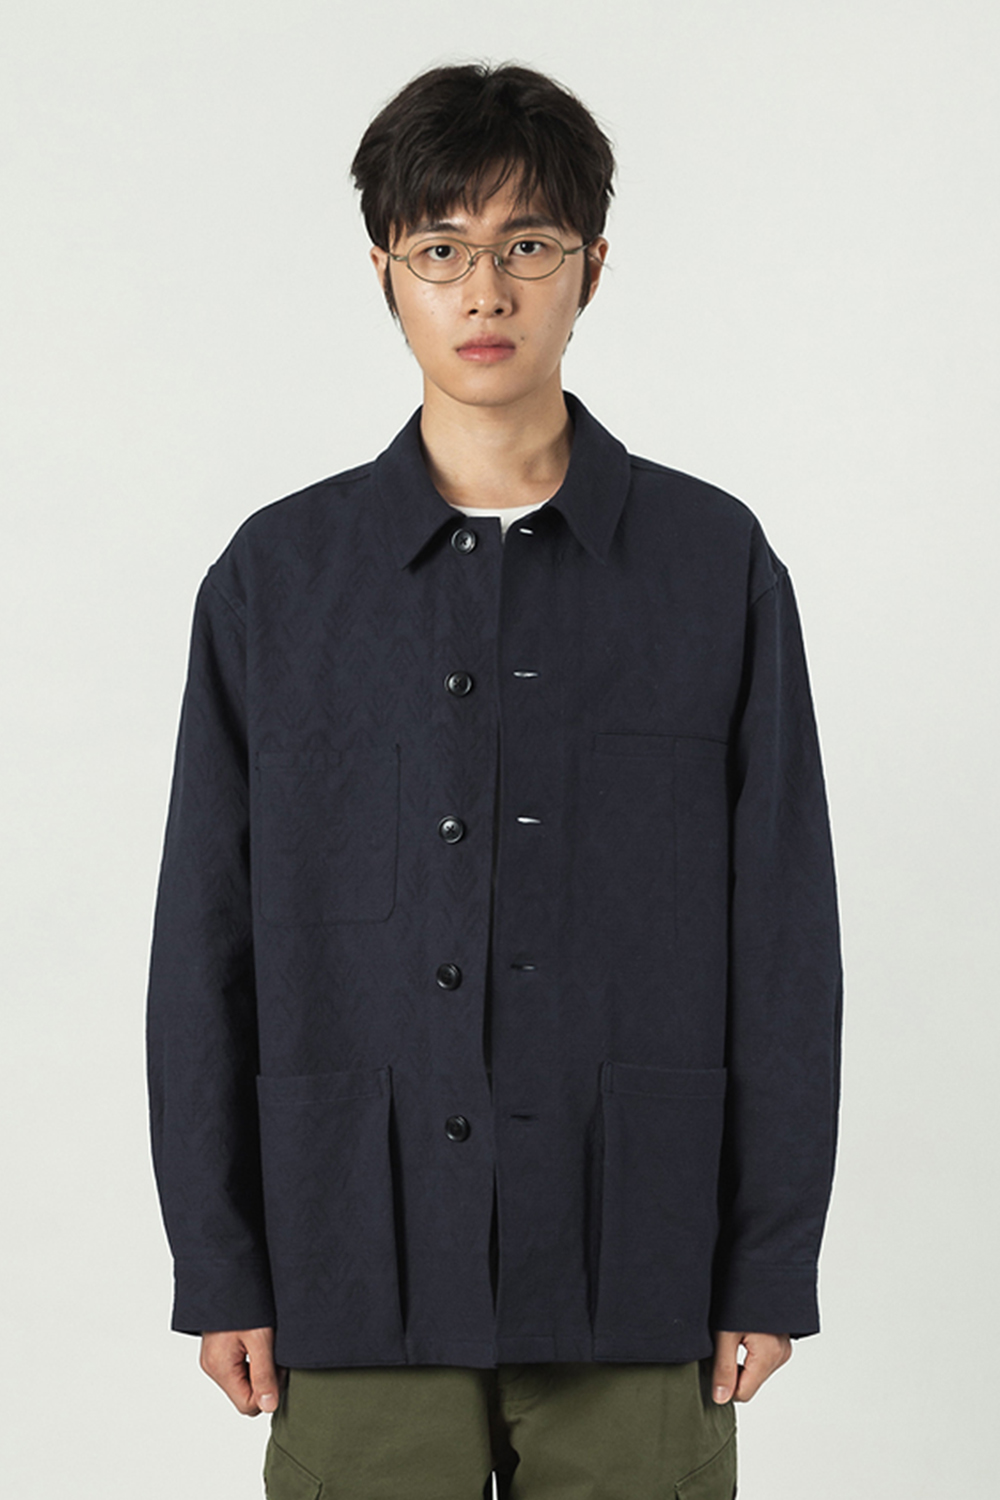 OPTICIAN JACKET (Collaboration with 미완경(美完鏡)) (NAVY)